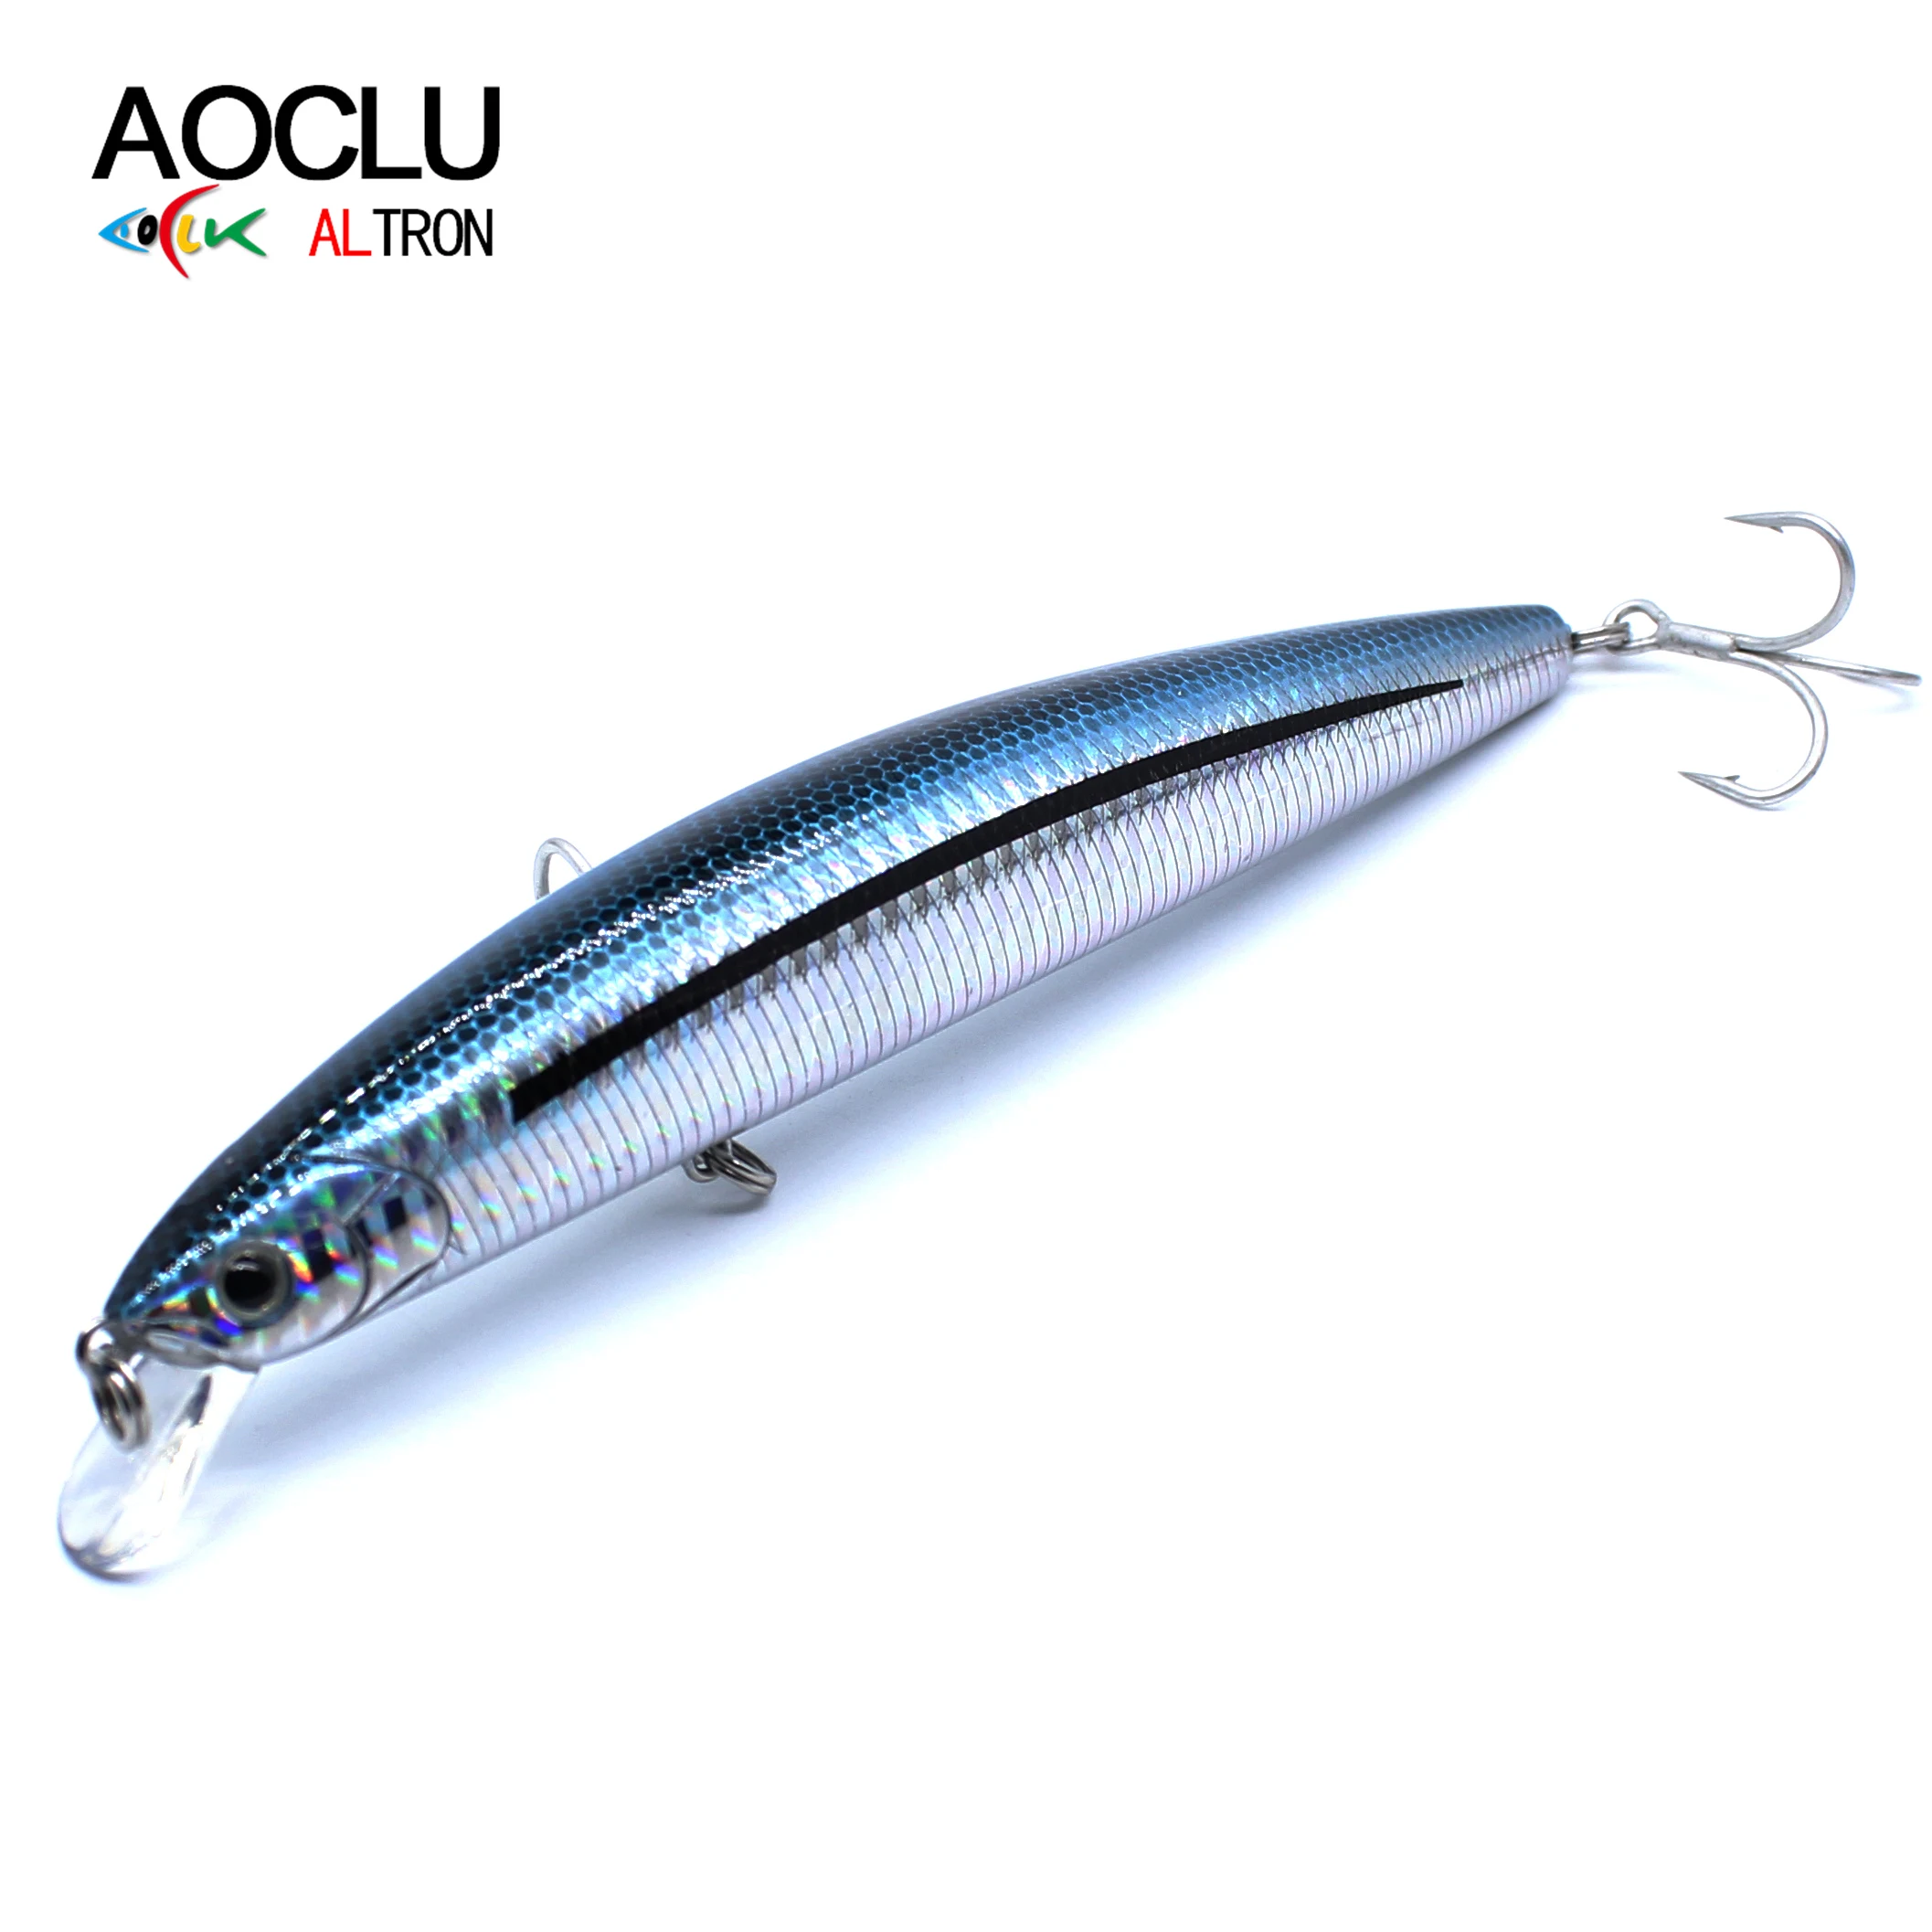 Enlarge AOCLU Jerkbait wobblers 16cm 30g Depth 0.5-1.5m Floating Hard Bait Minnow Fishing lures weight transfer for long casting